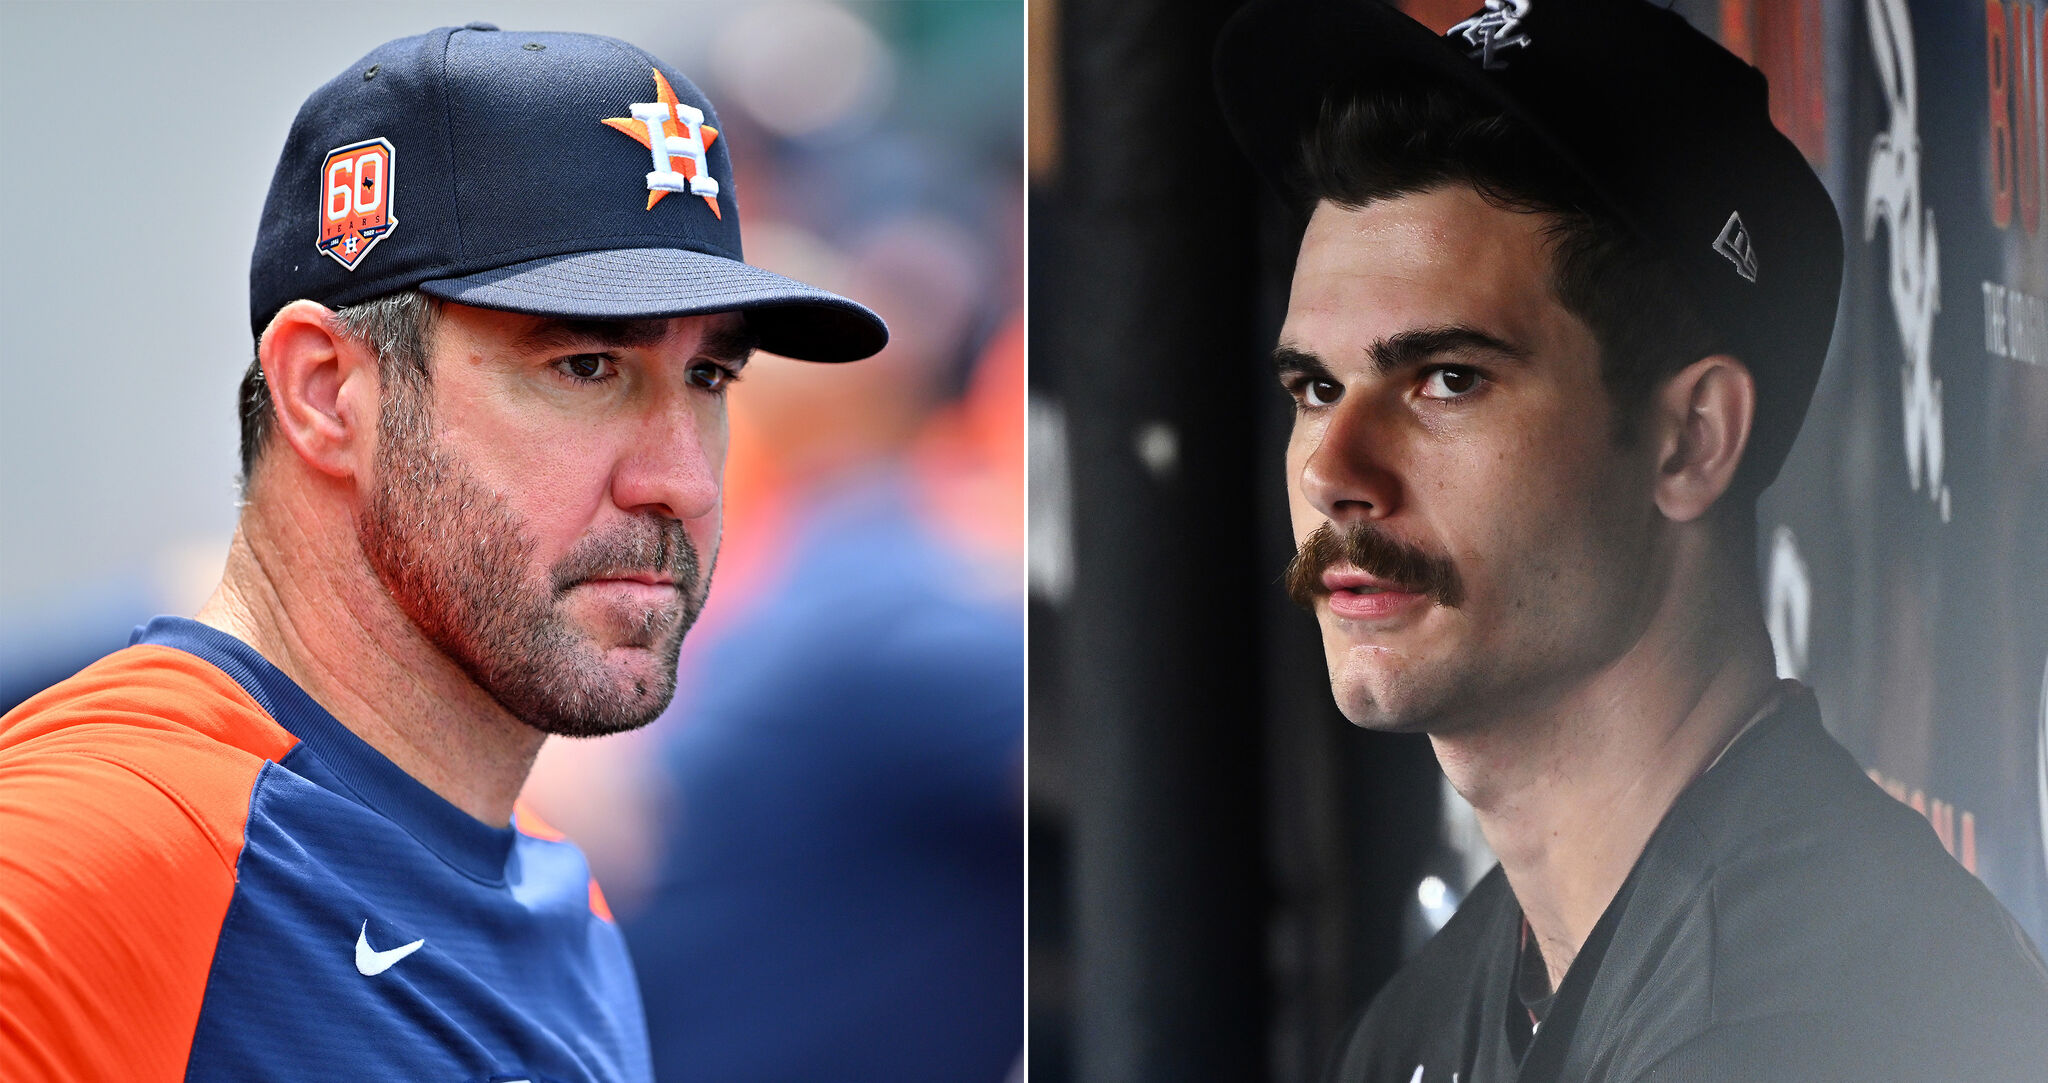 Houston Astros: Justin Verlander to face White Sox's Cease